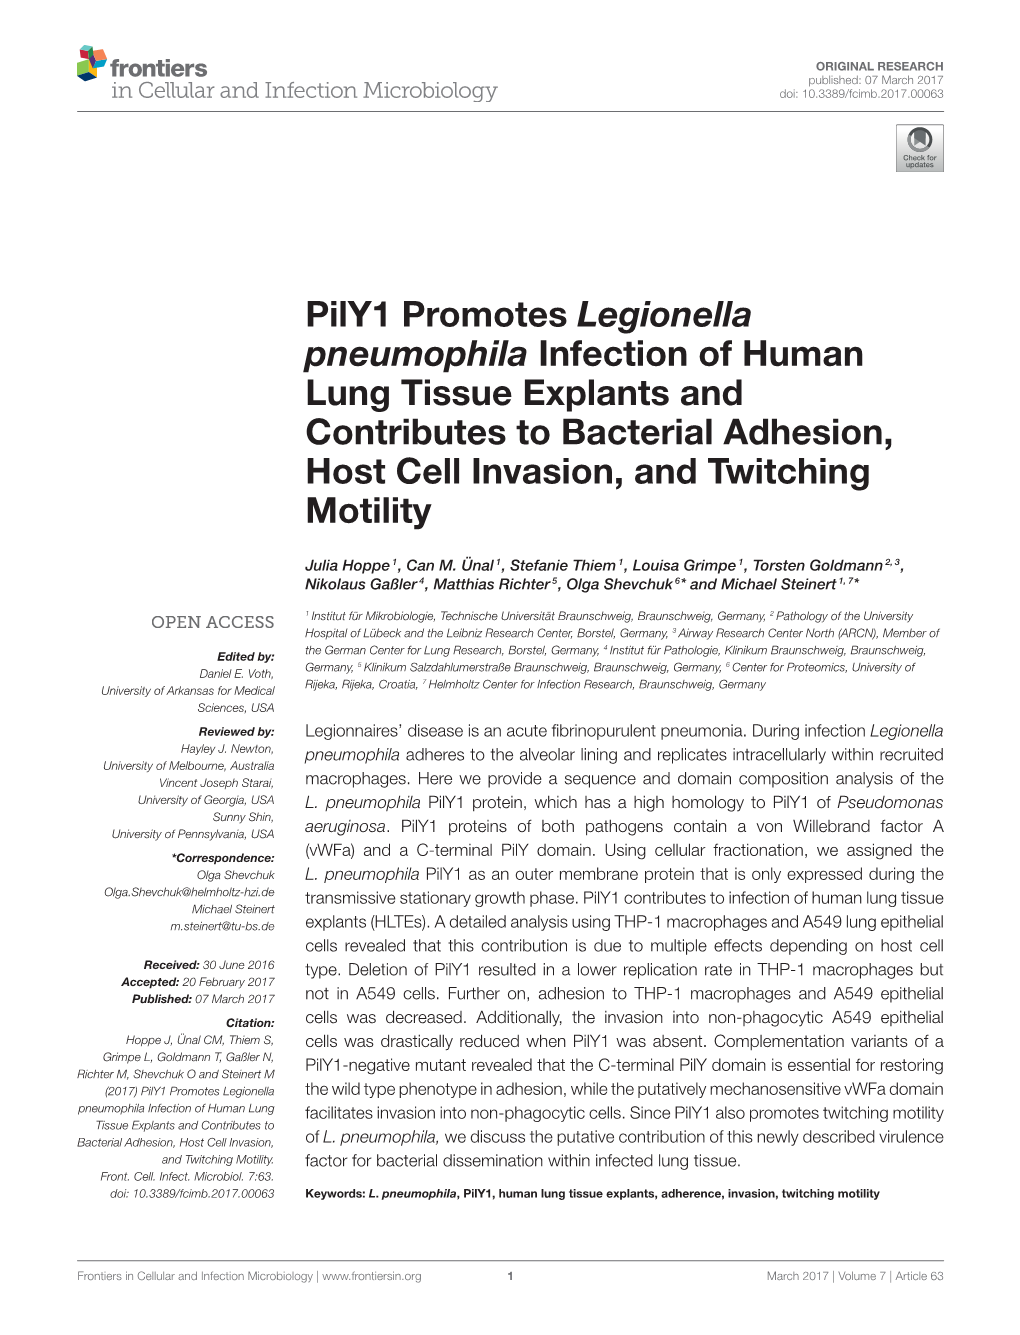 Pily1 Promotes Legionella Pneumophila Infection of Human Lung Tissue Explants and Contributes to Bacterial Adhesion, Host Cell Invasion, and Twitching Motility